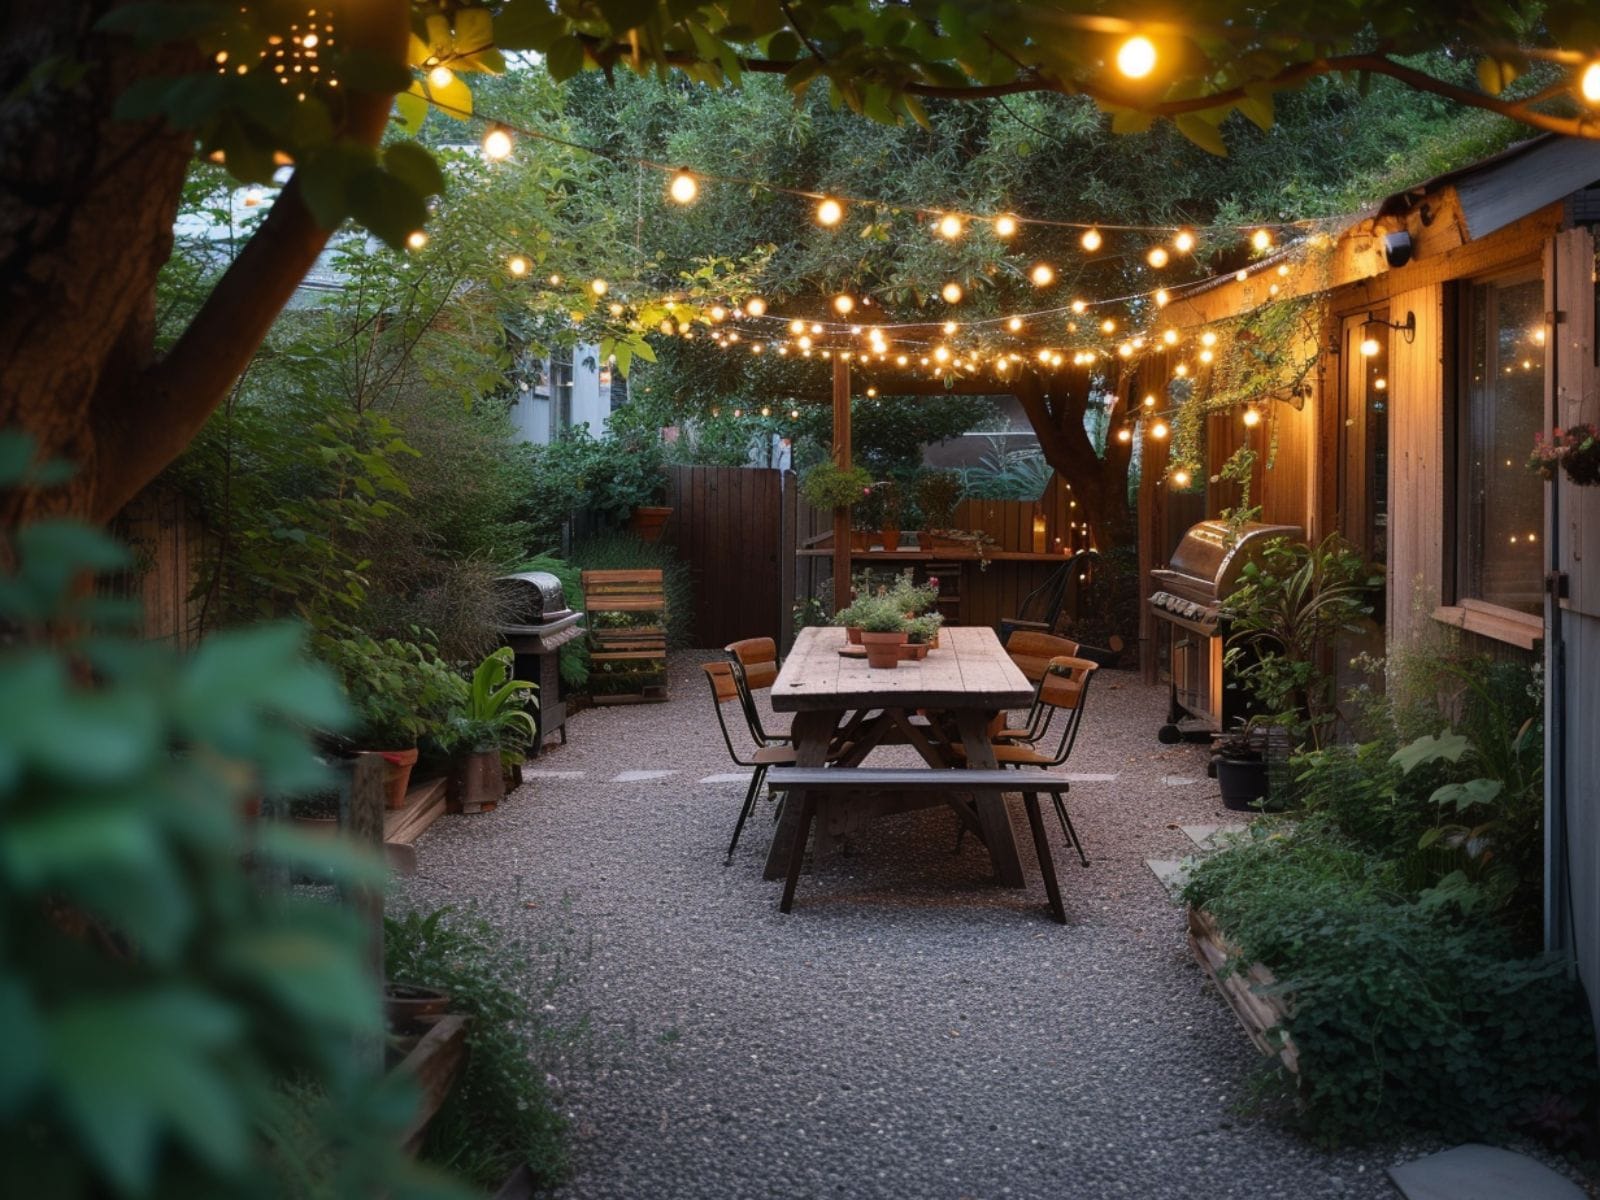 Bulb string lights forming a canopy above an outdoor seating area